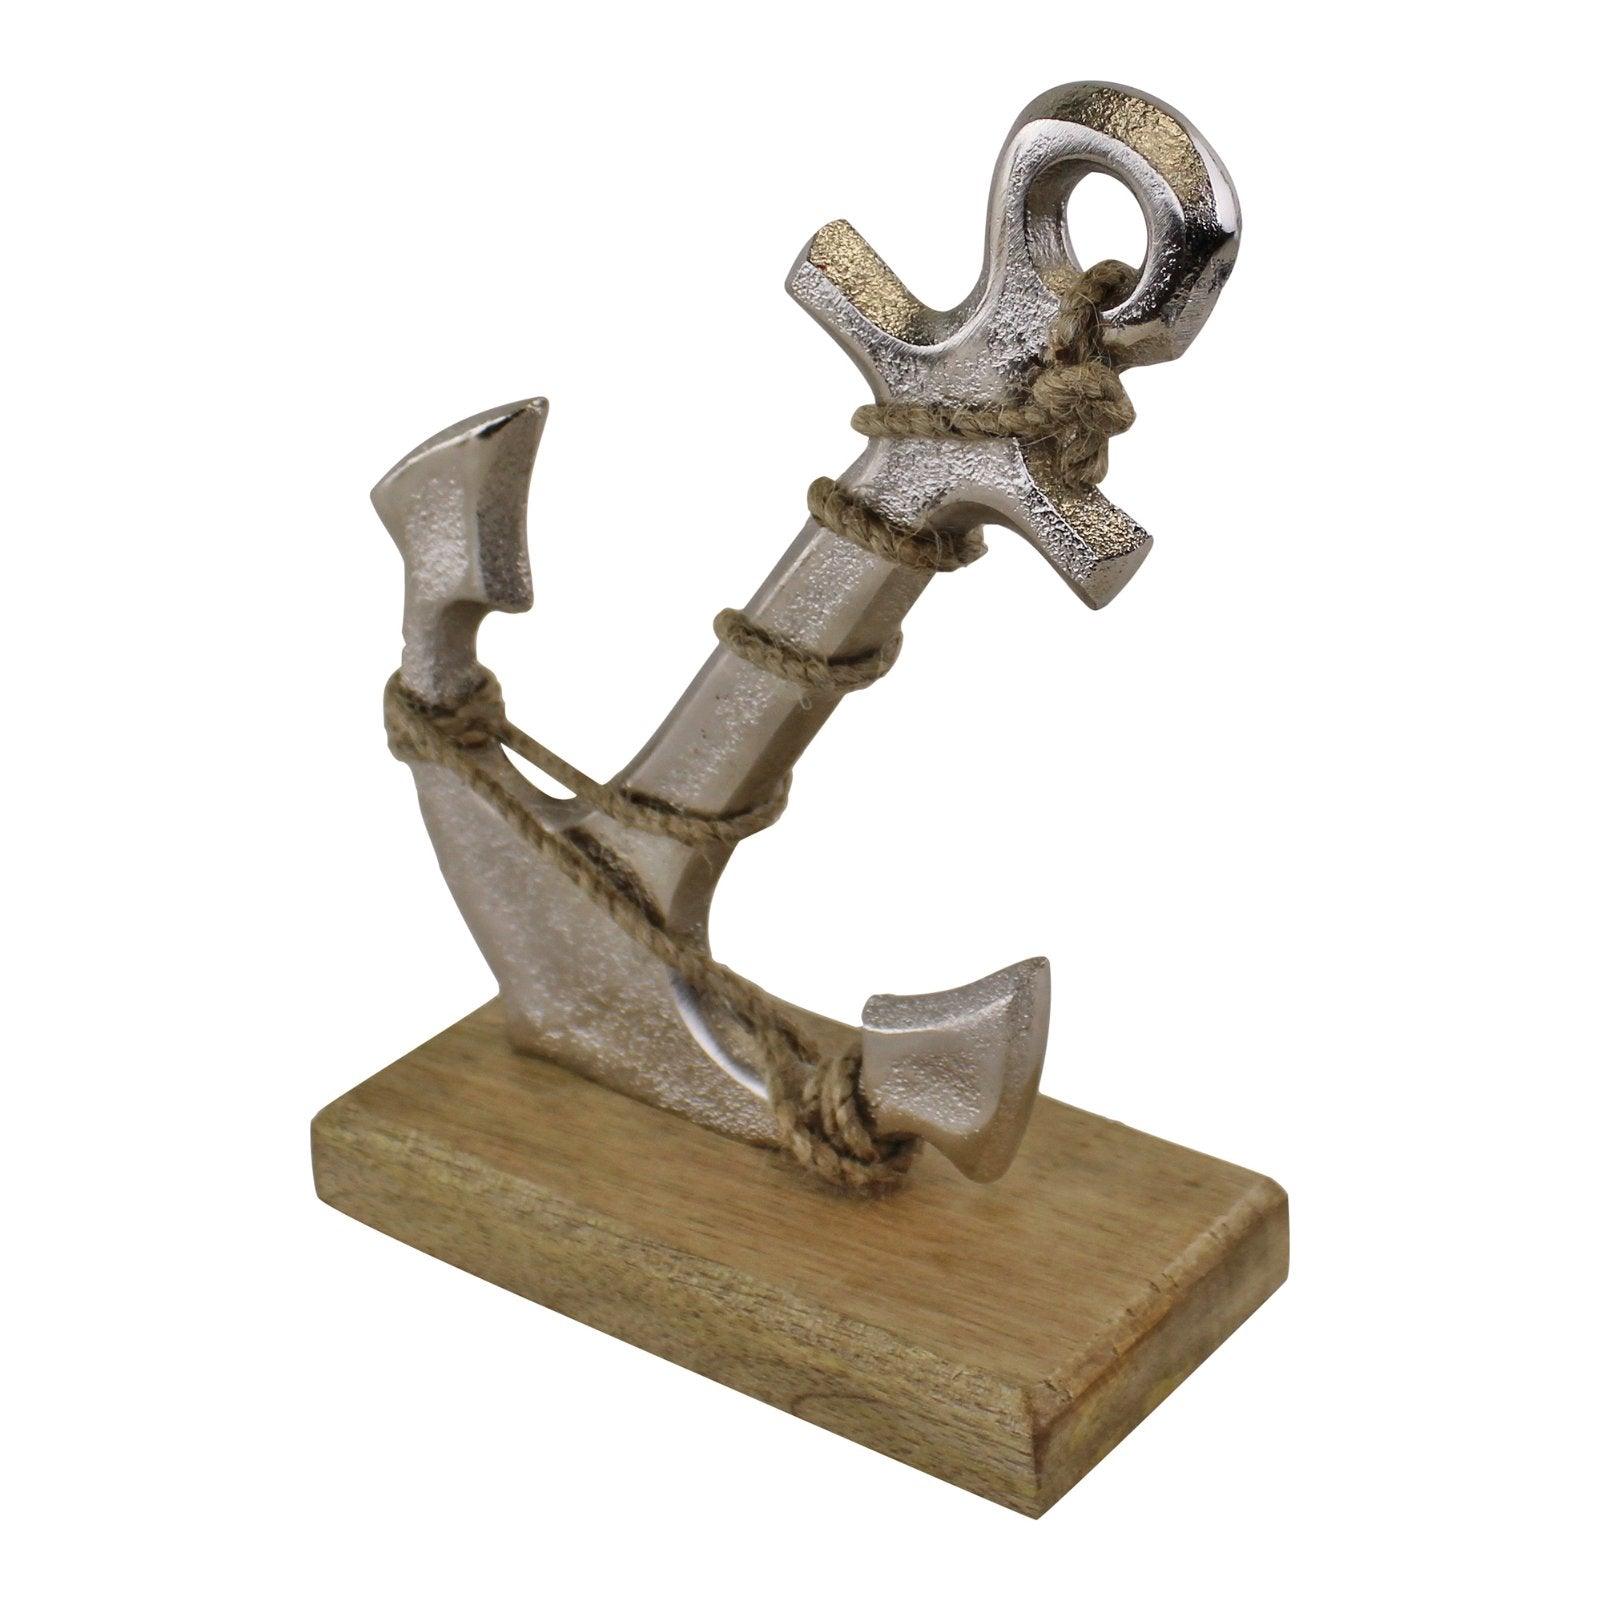 Silver Metal Anchor Ornament On Wooden Base - £16.99 - Ornaments 